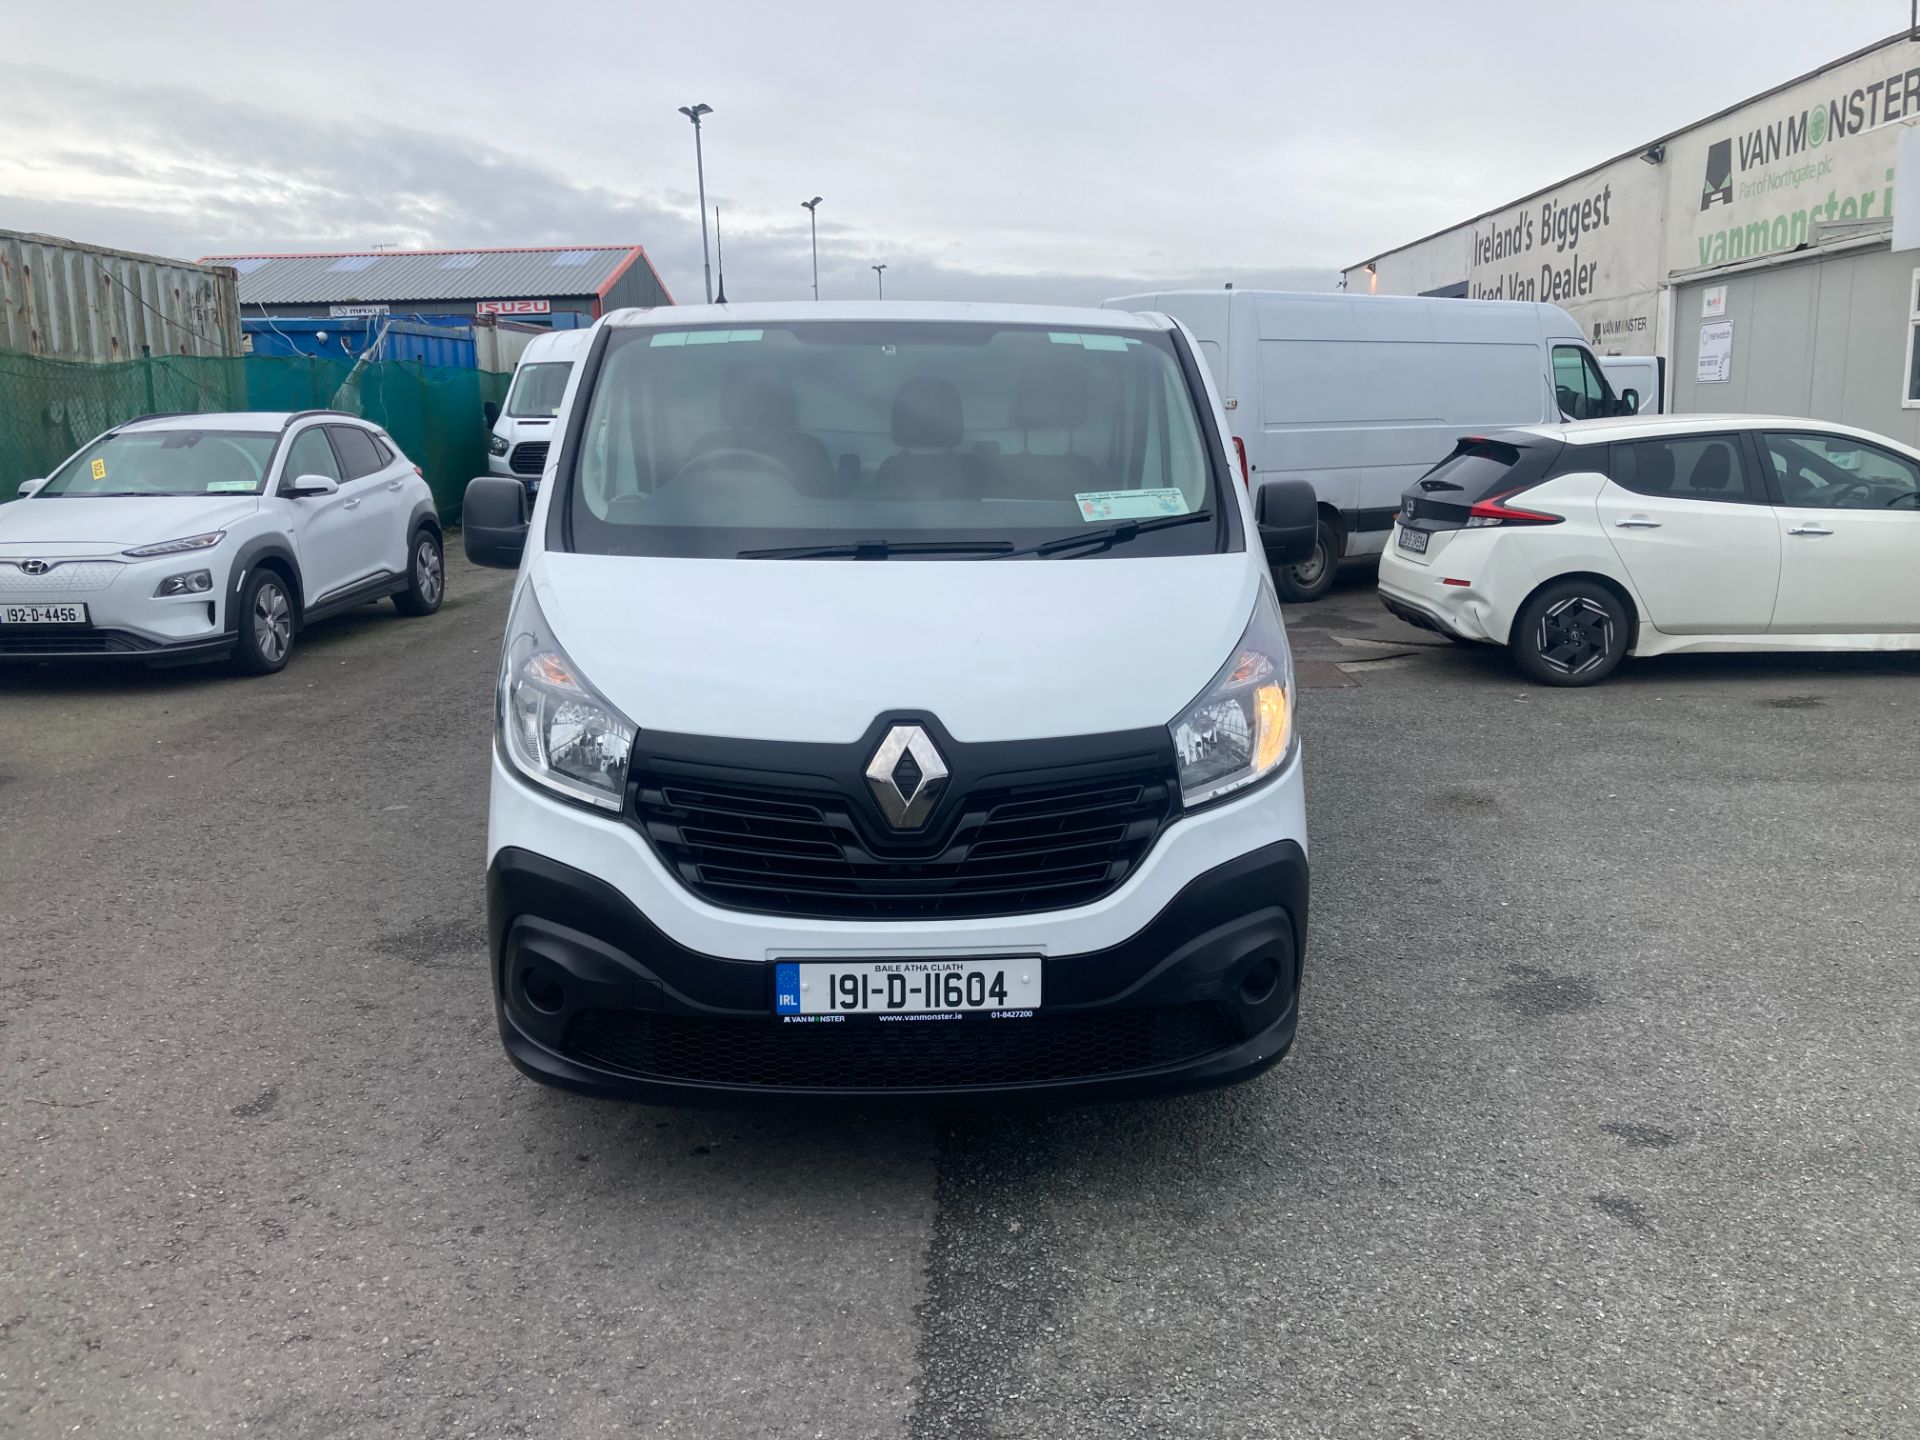 2019 Renault Trafic LL29 DCI 120 Business (191D11604) Image 2